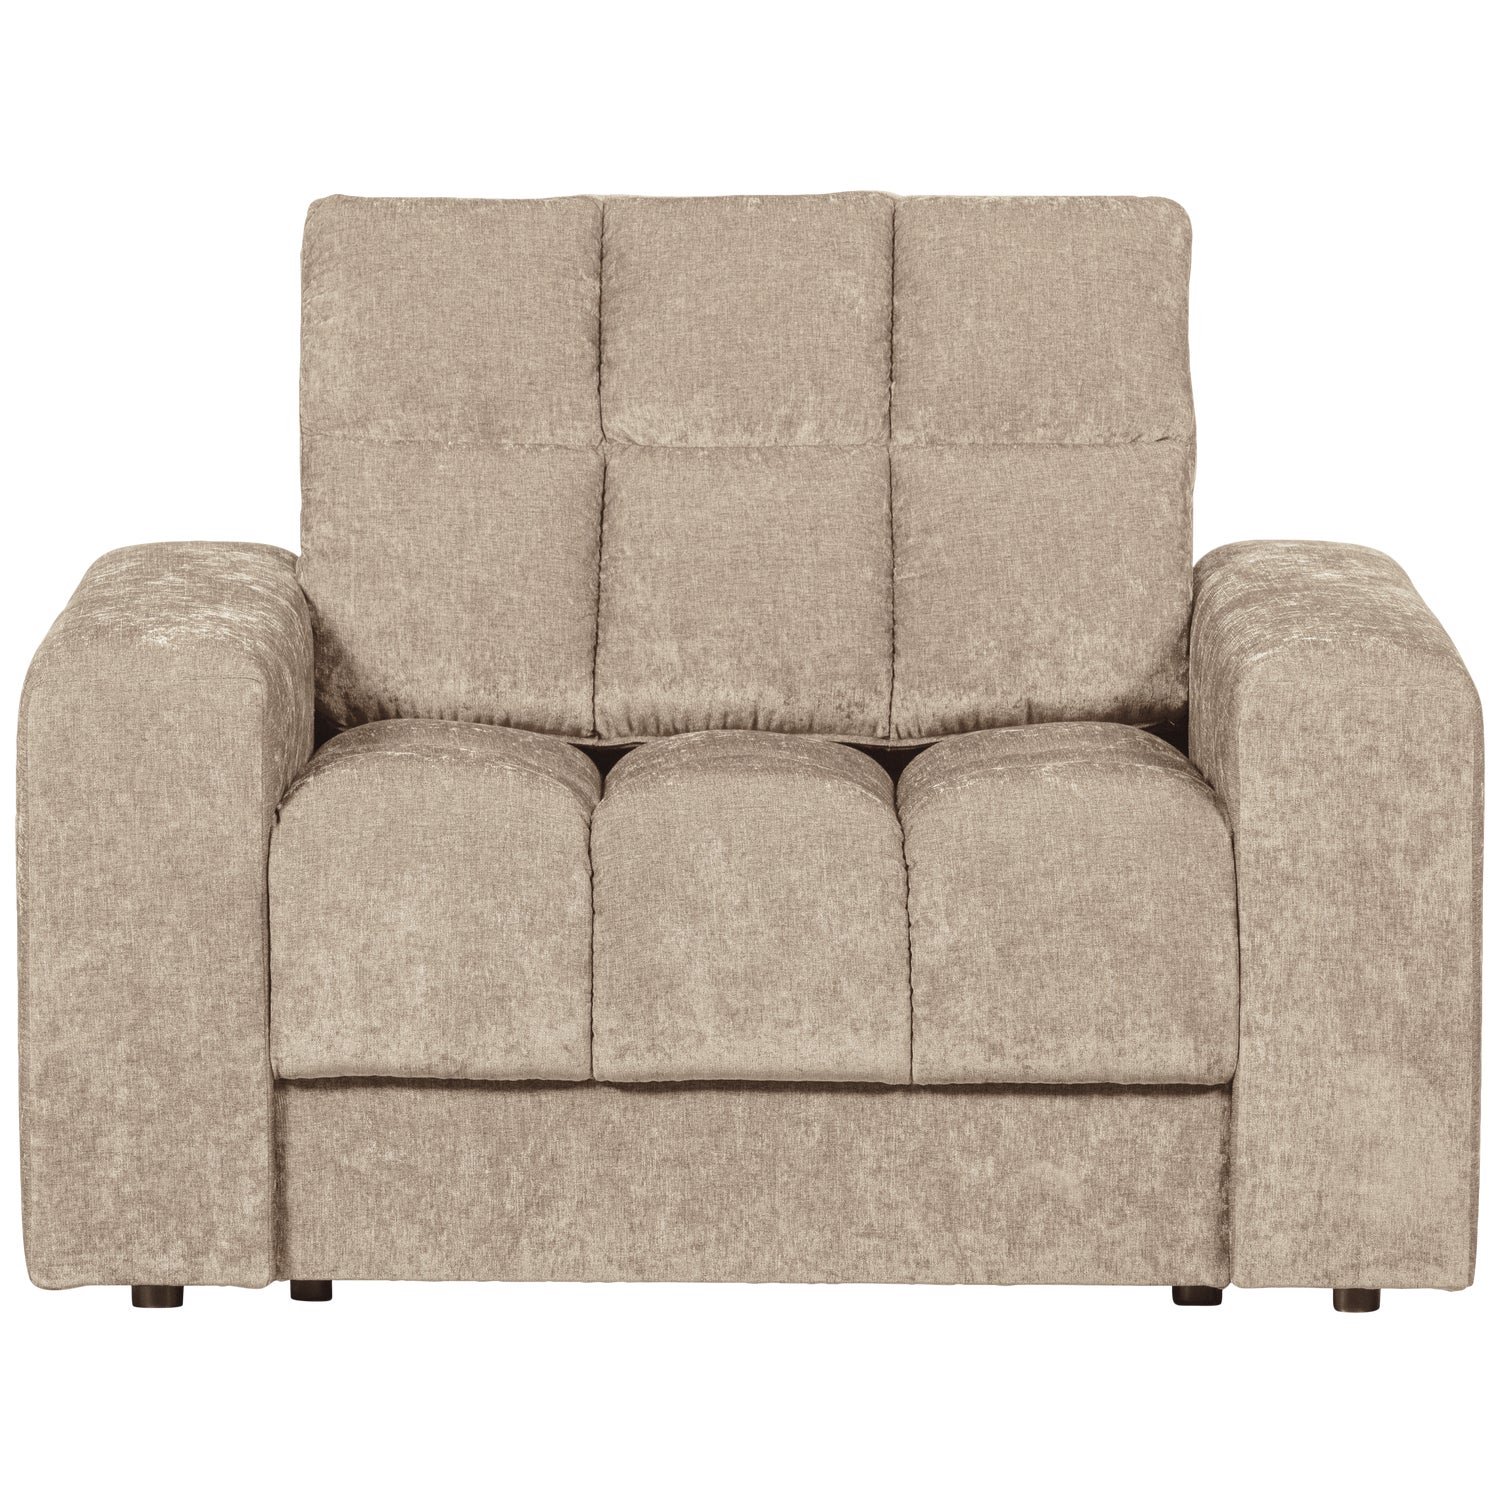 379003-N-01_VS_WE_Second_date_fauteuil_vintage_nougat.png?auto=webp&format=png&width=1500&height=1500